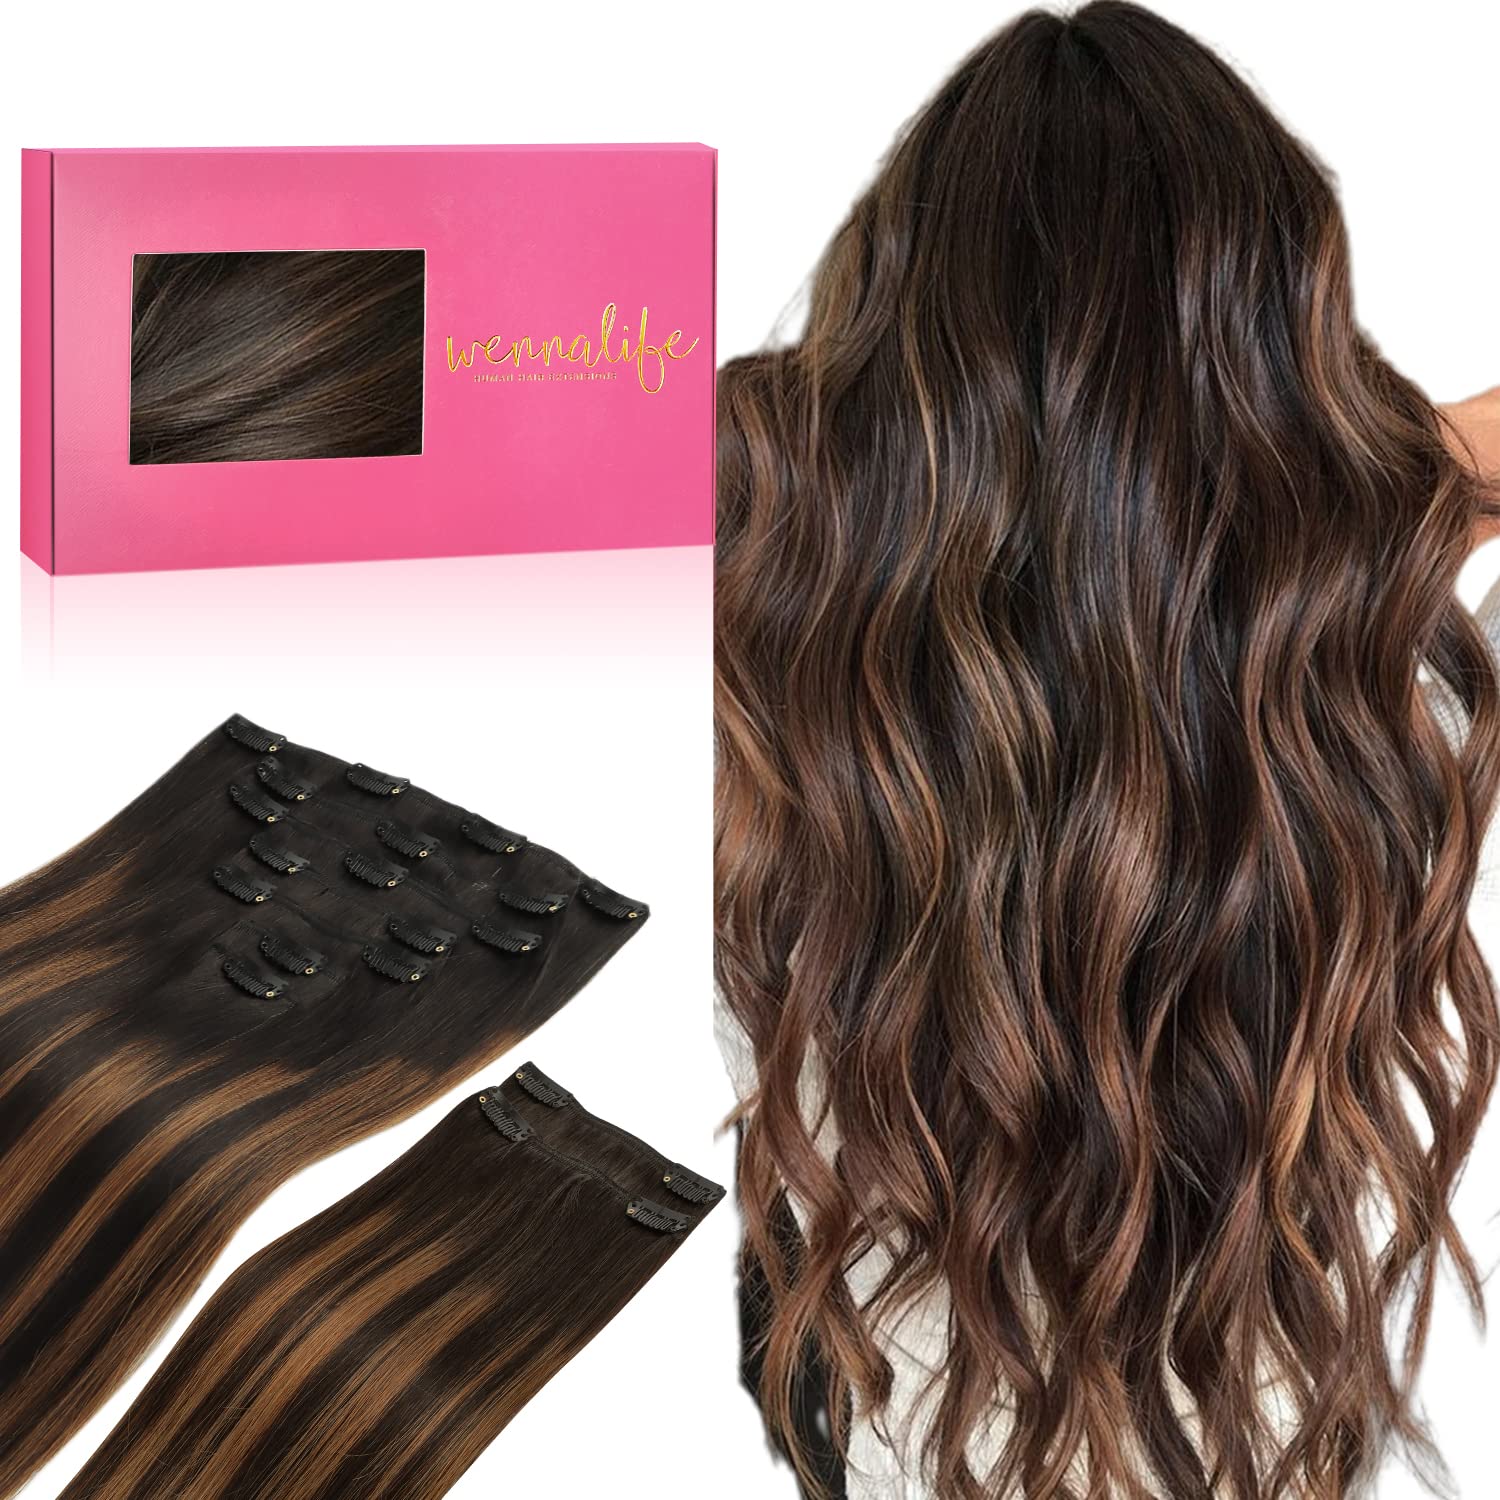 WENNALIFE Clip in Hair Extensions, 150g 24 Inch 9pcs Highlight Dark Brown to Chestnut Brown and Dirty Blonde Human Hair Extensions Thicker Clip in